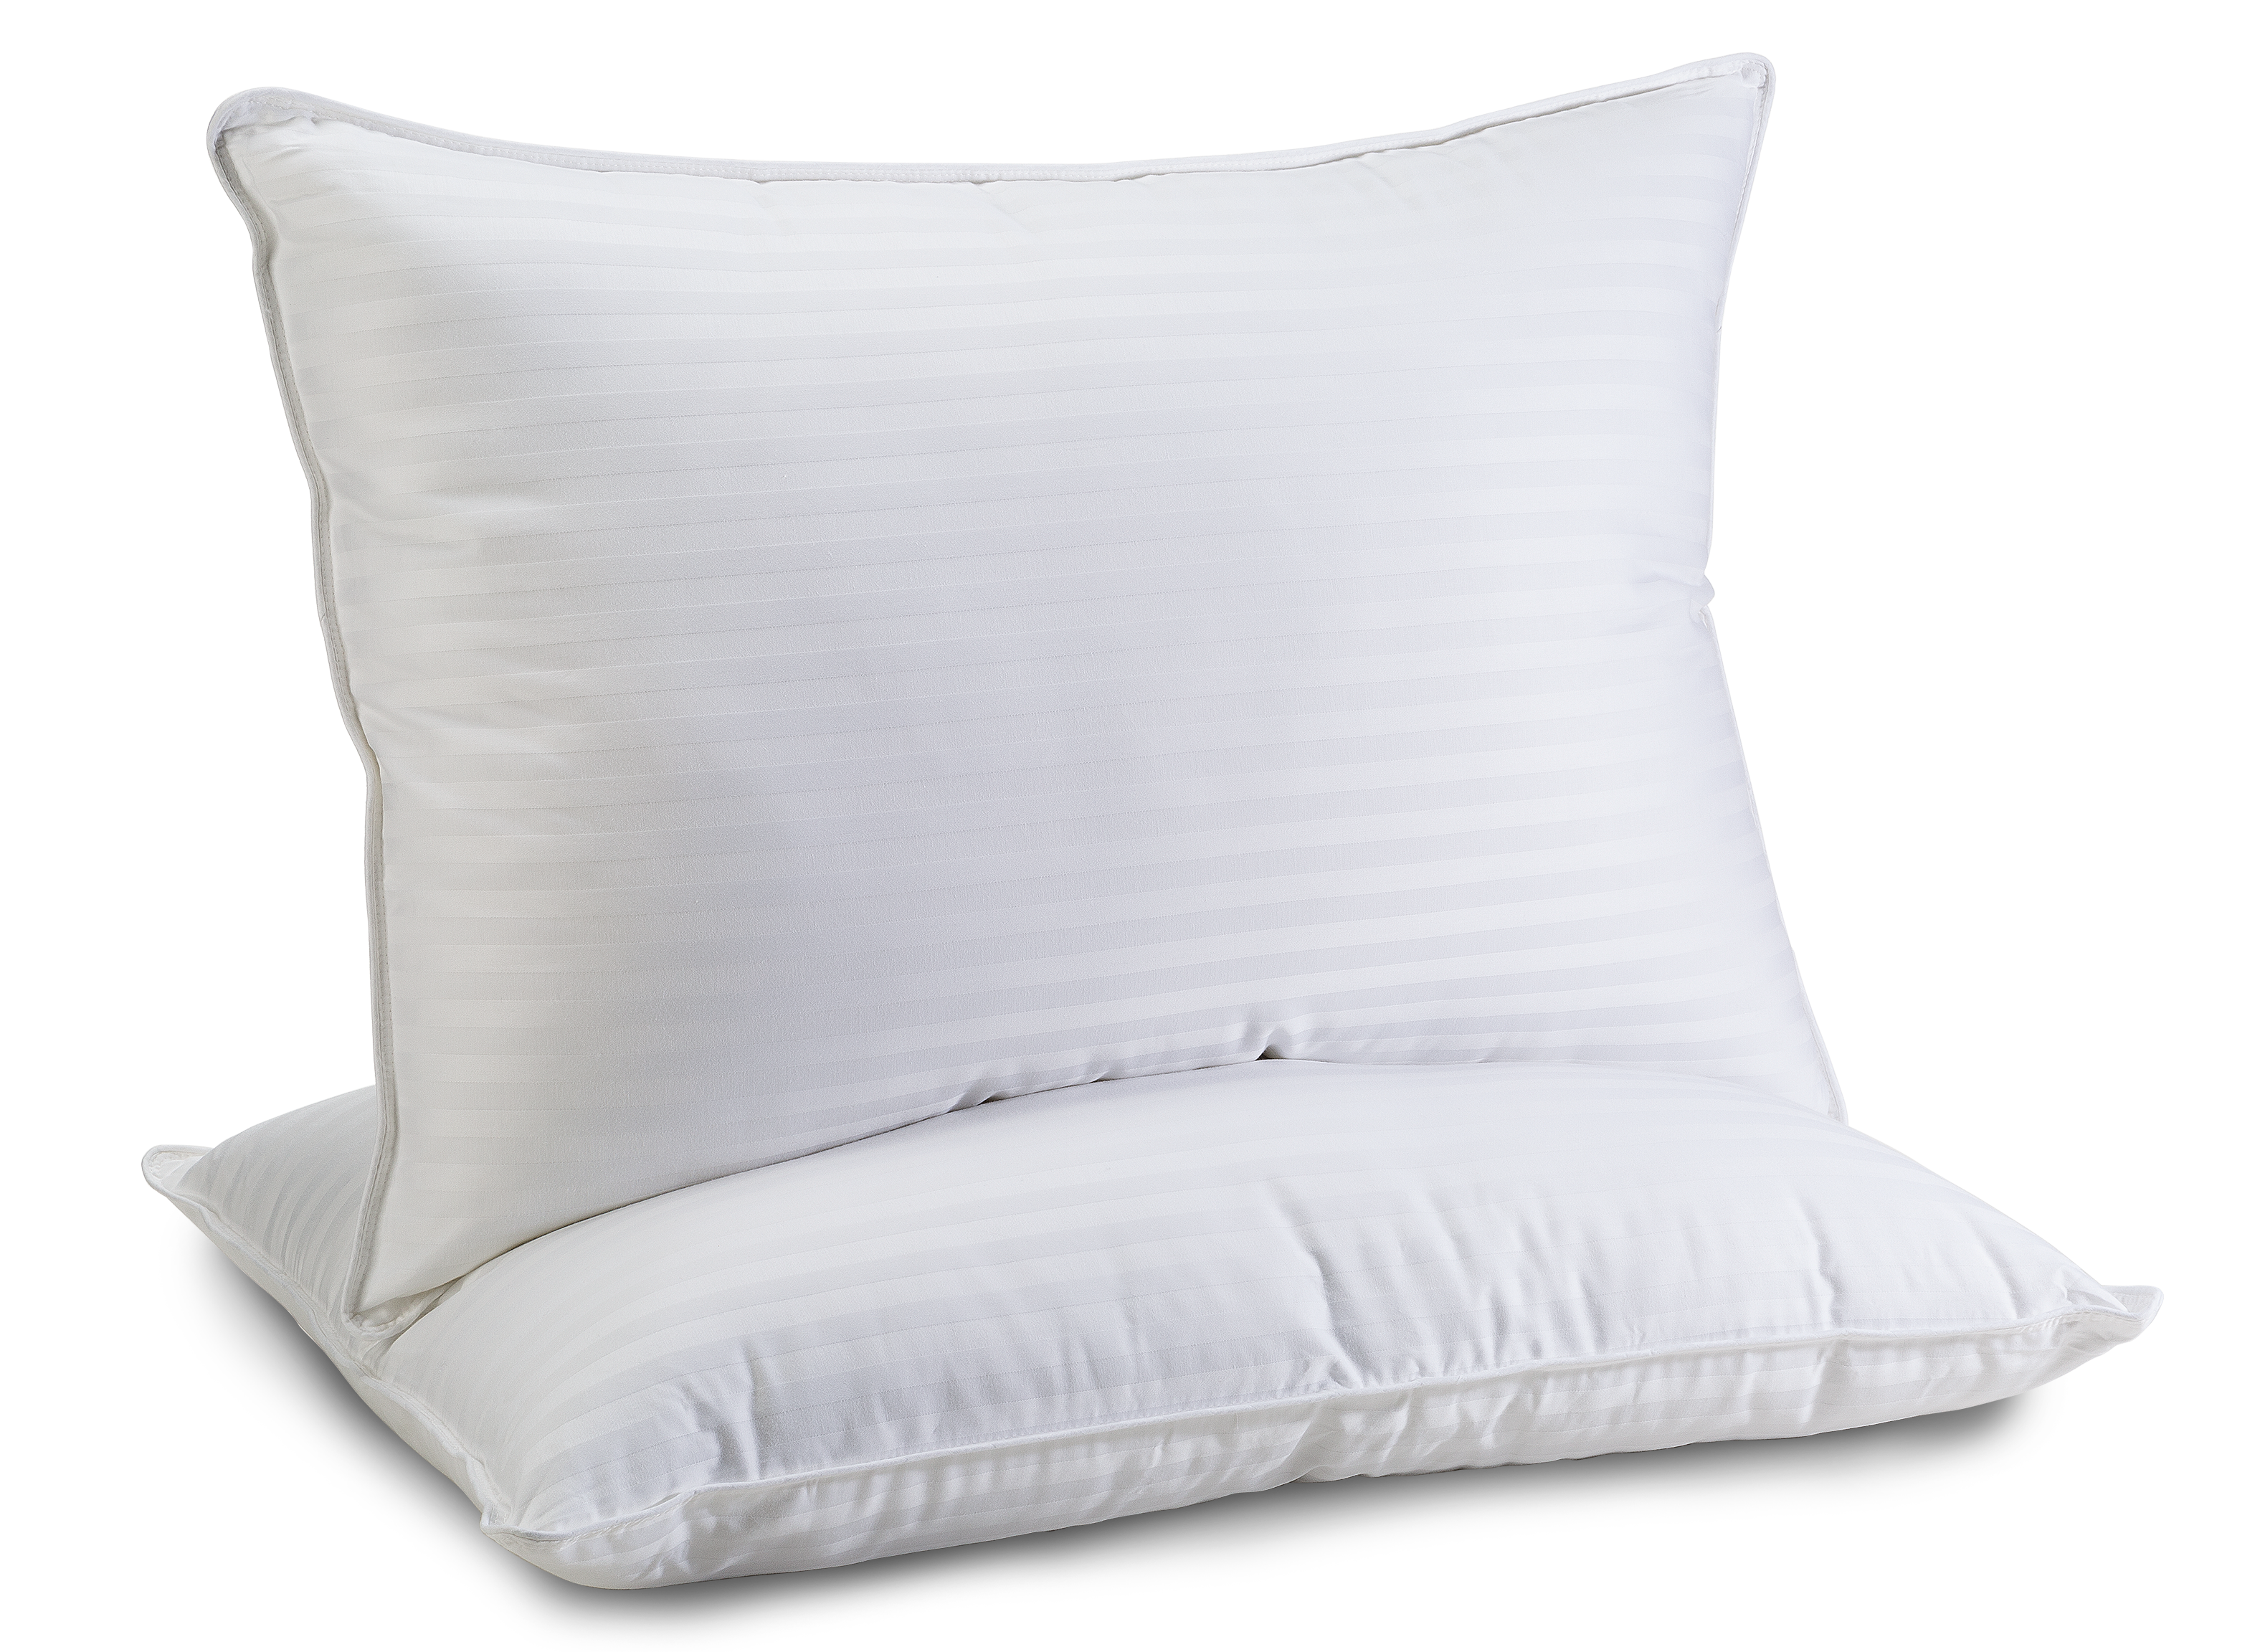 https://crdms.images.consumerreports.org/prod/products/cr/models/398968-pillows-beckham-luxury-linens-hotel-collection-2pk-10007392.png